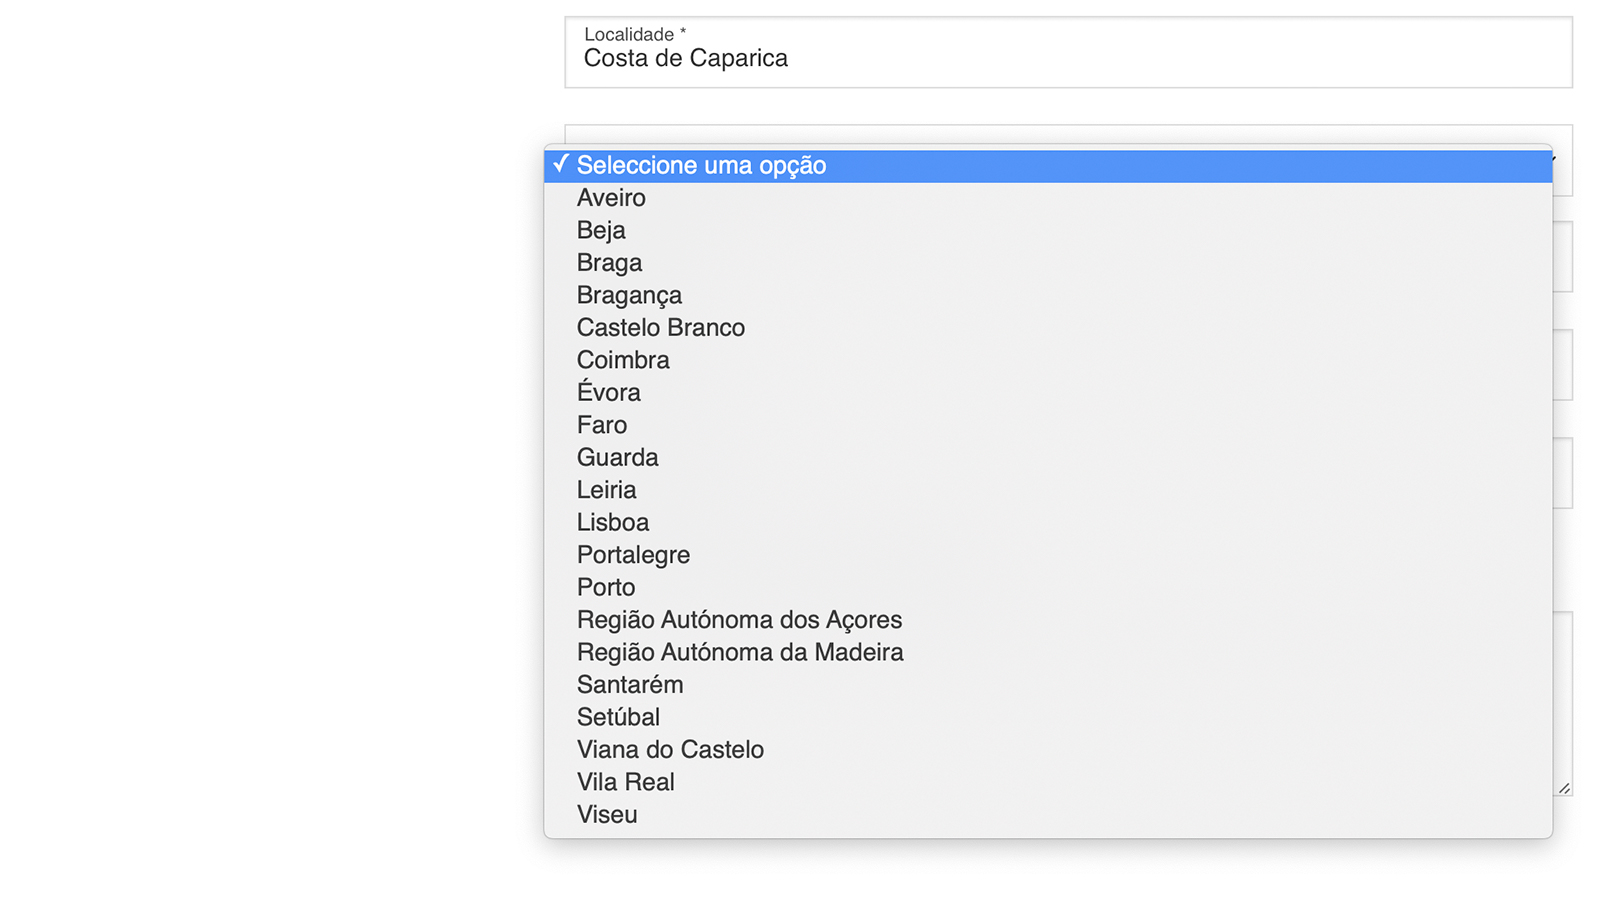 Portuguese states on the checkout page.